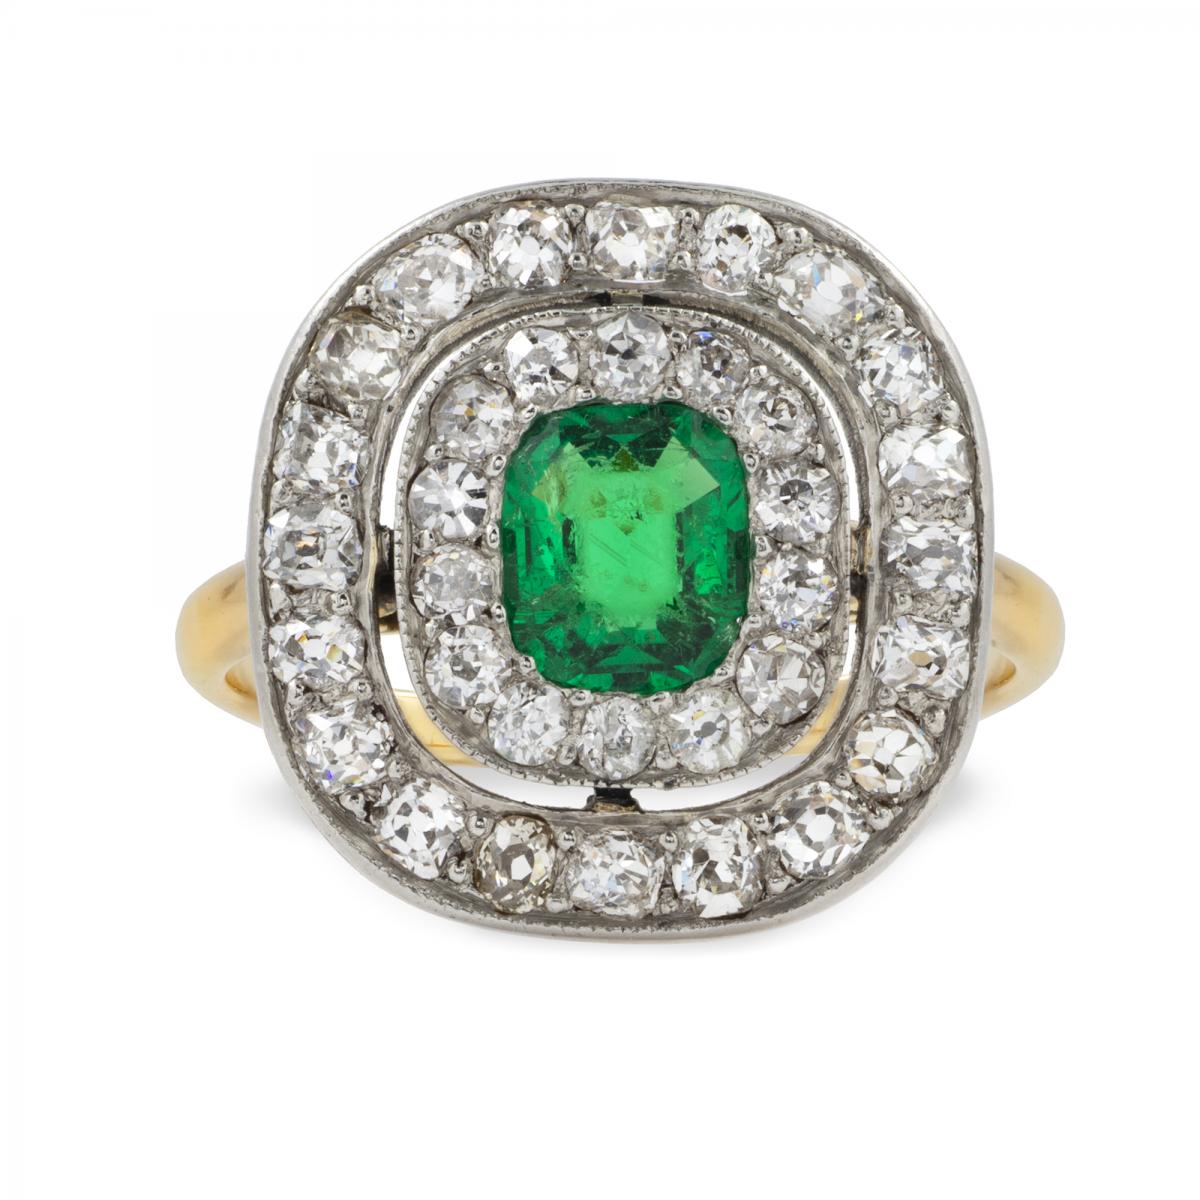 An Emerald and Diamond Double-cluster Ring, Circa 1900